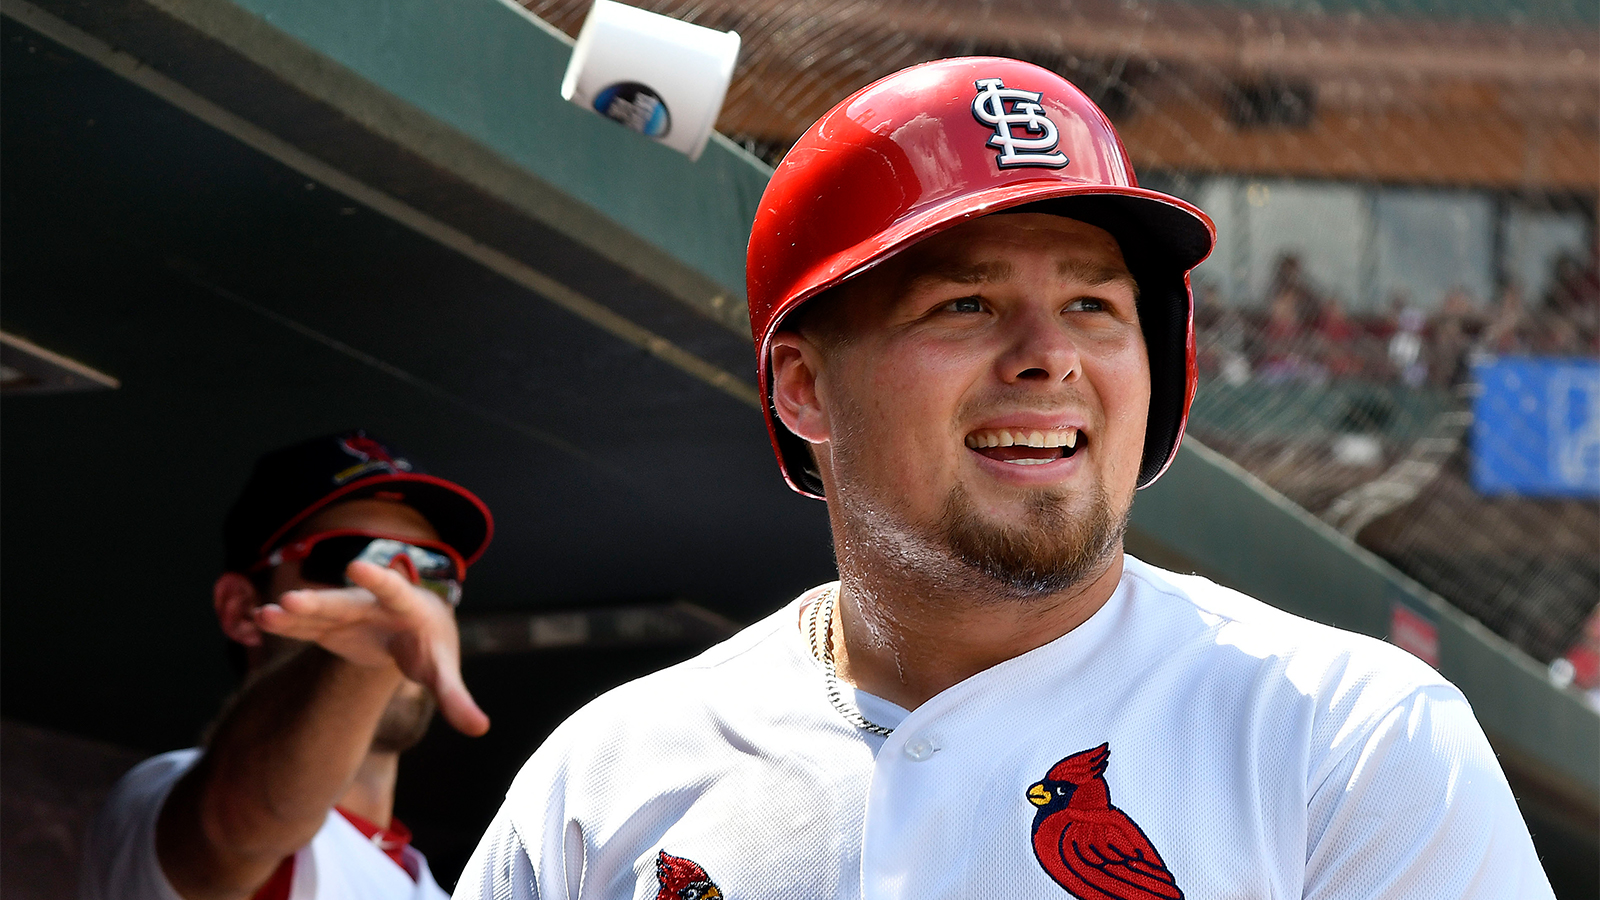 Luke Voit earning a role with the Cardinals?